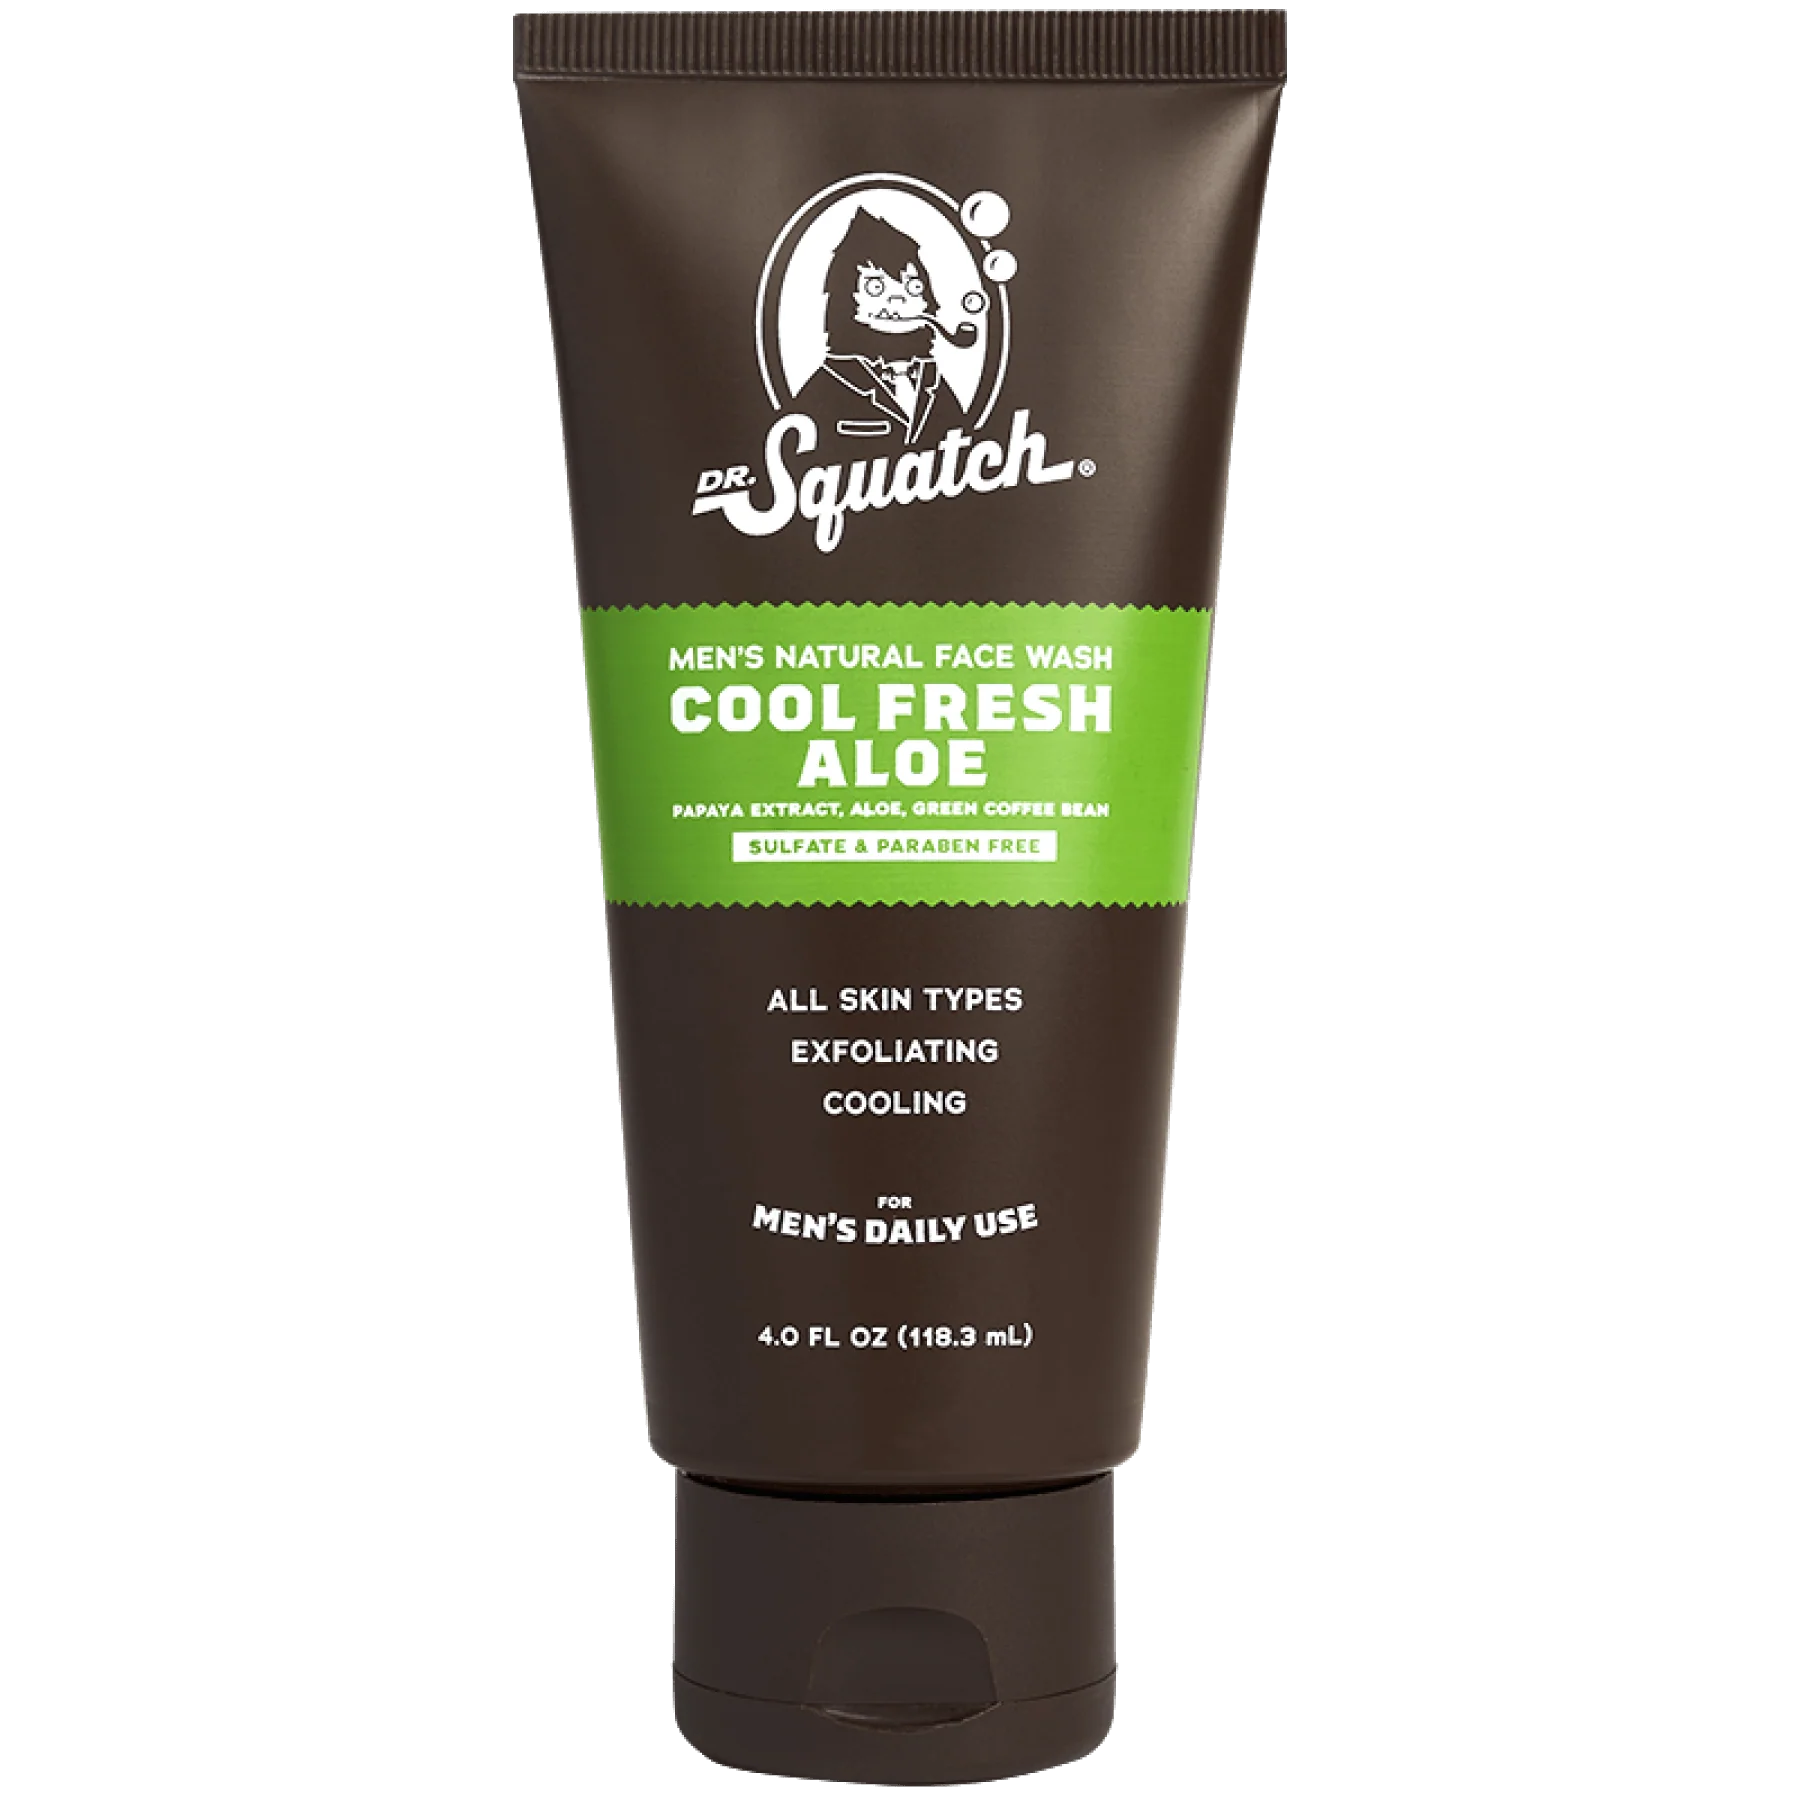  Dr. Squatch Fresh Falls Conditioner : Beauty & Personal Care